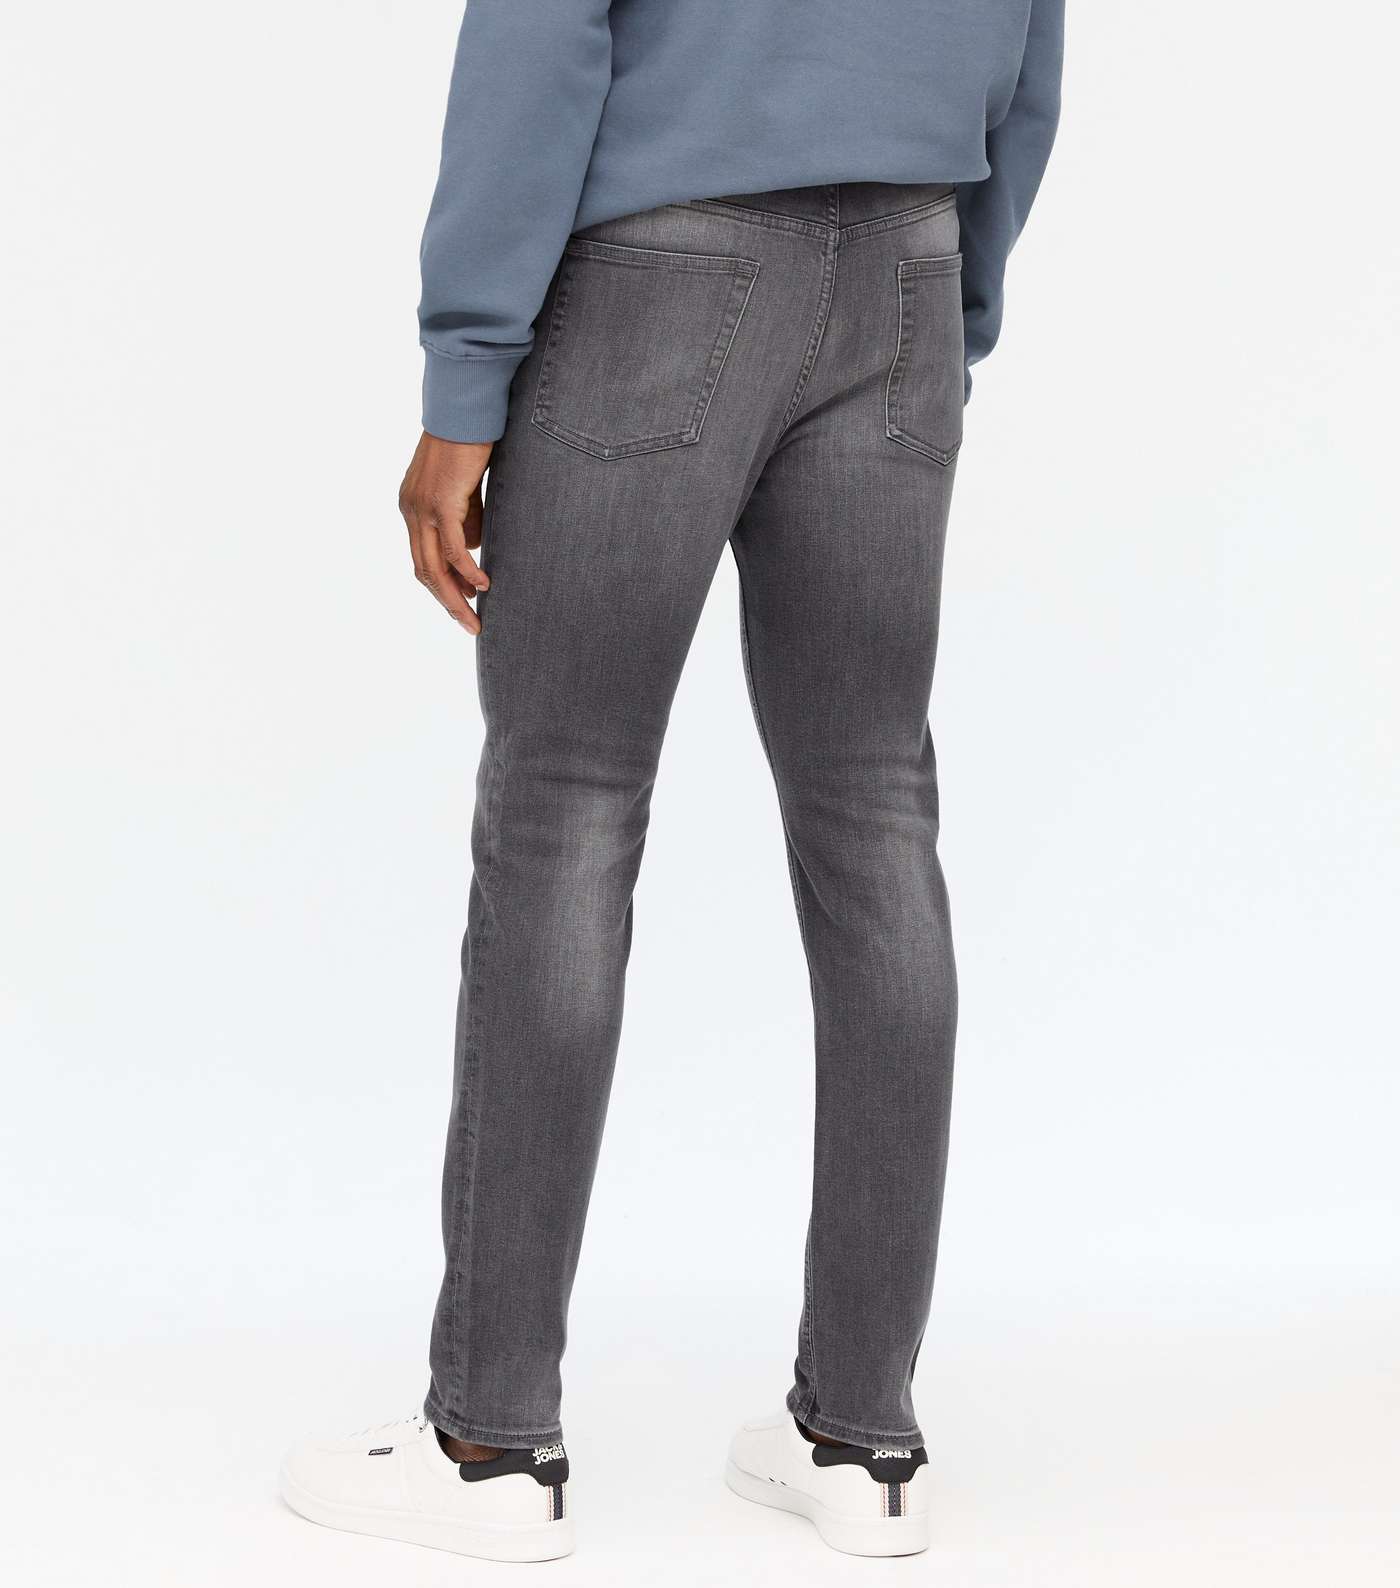 Pale Grey Washed Slim Stretch Jeans Image 4